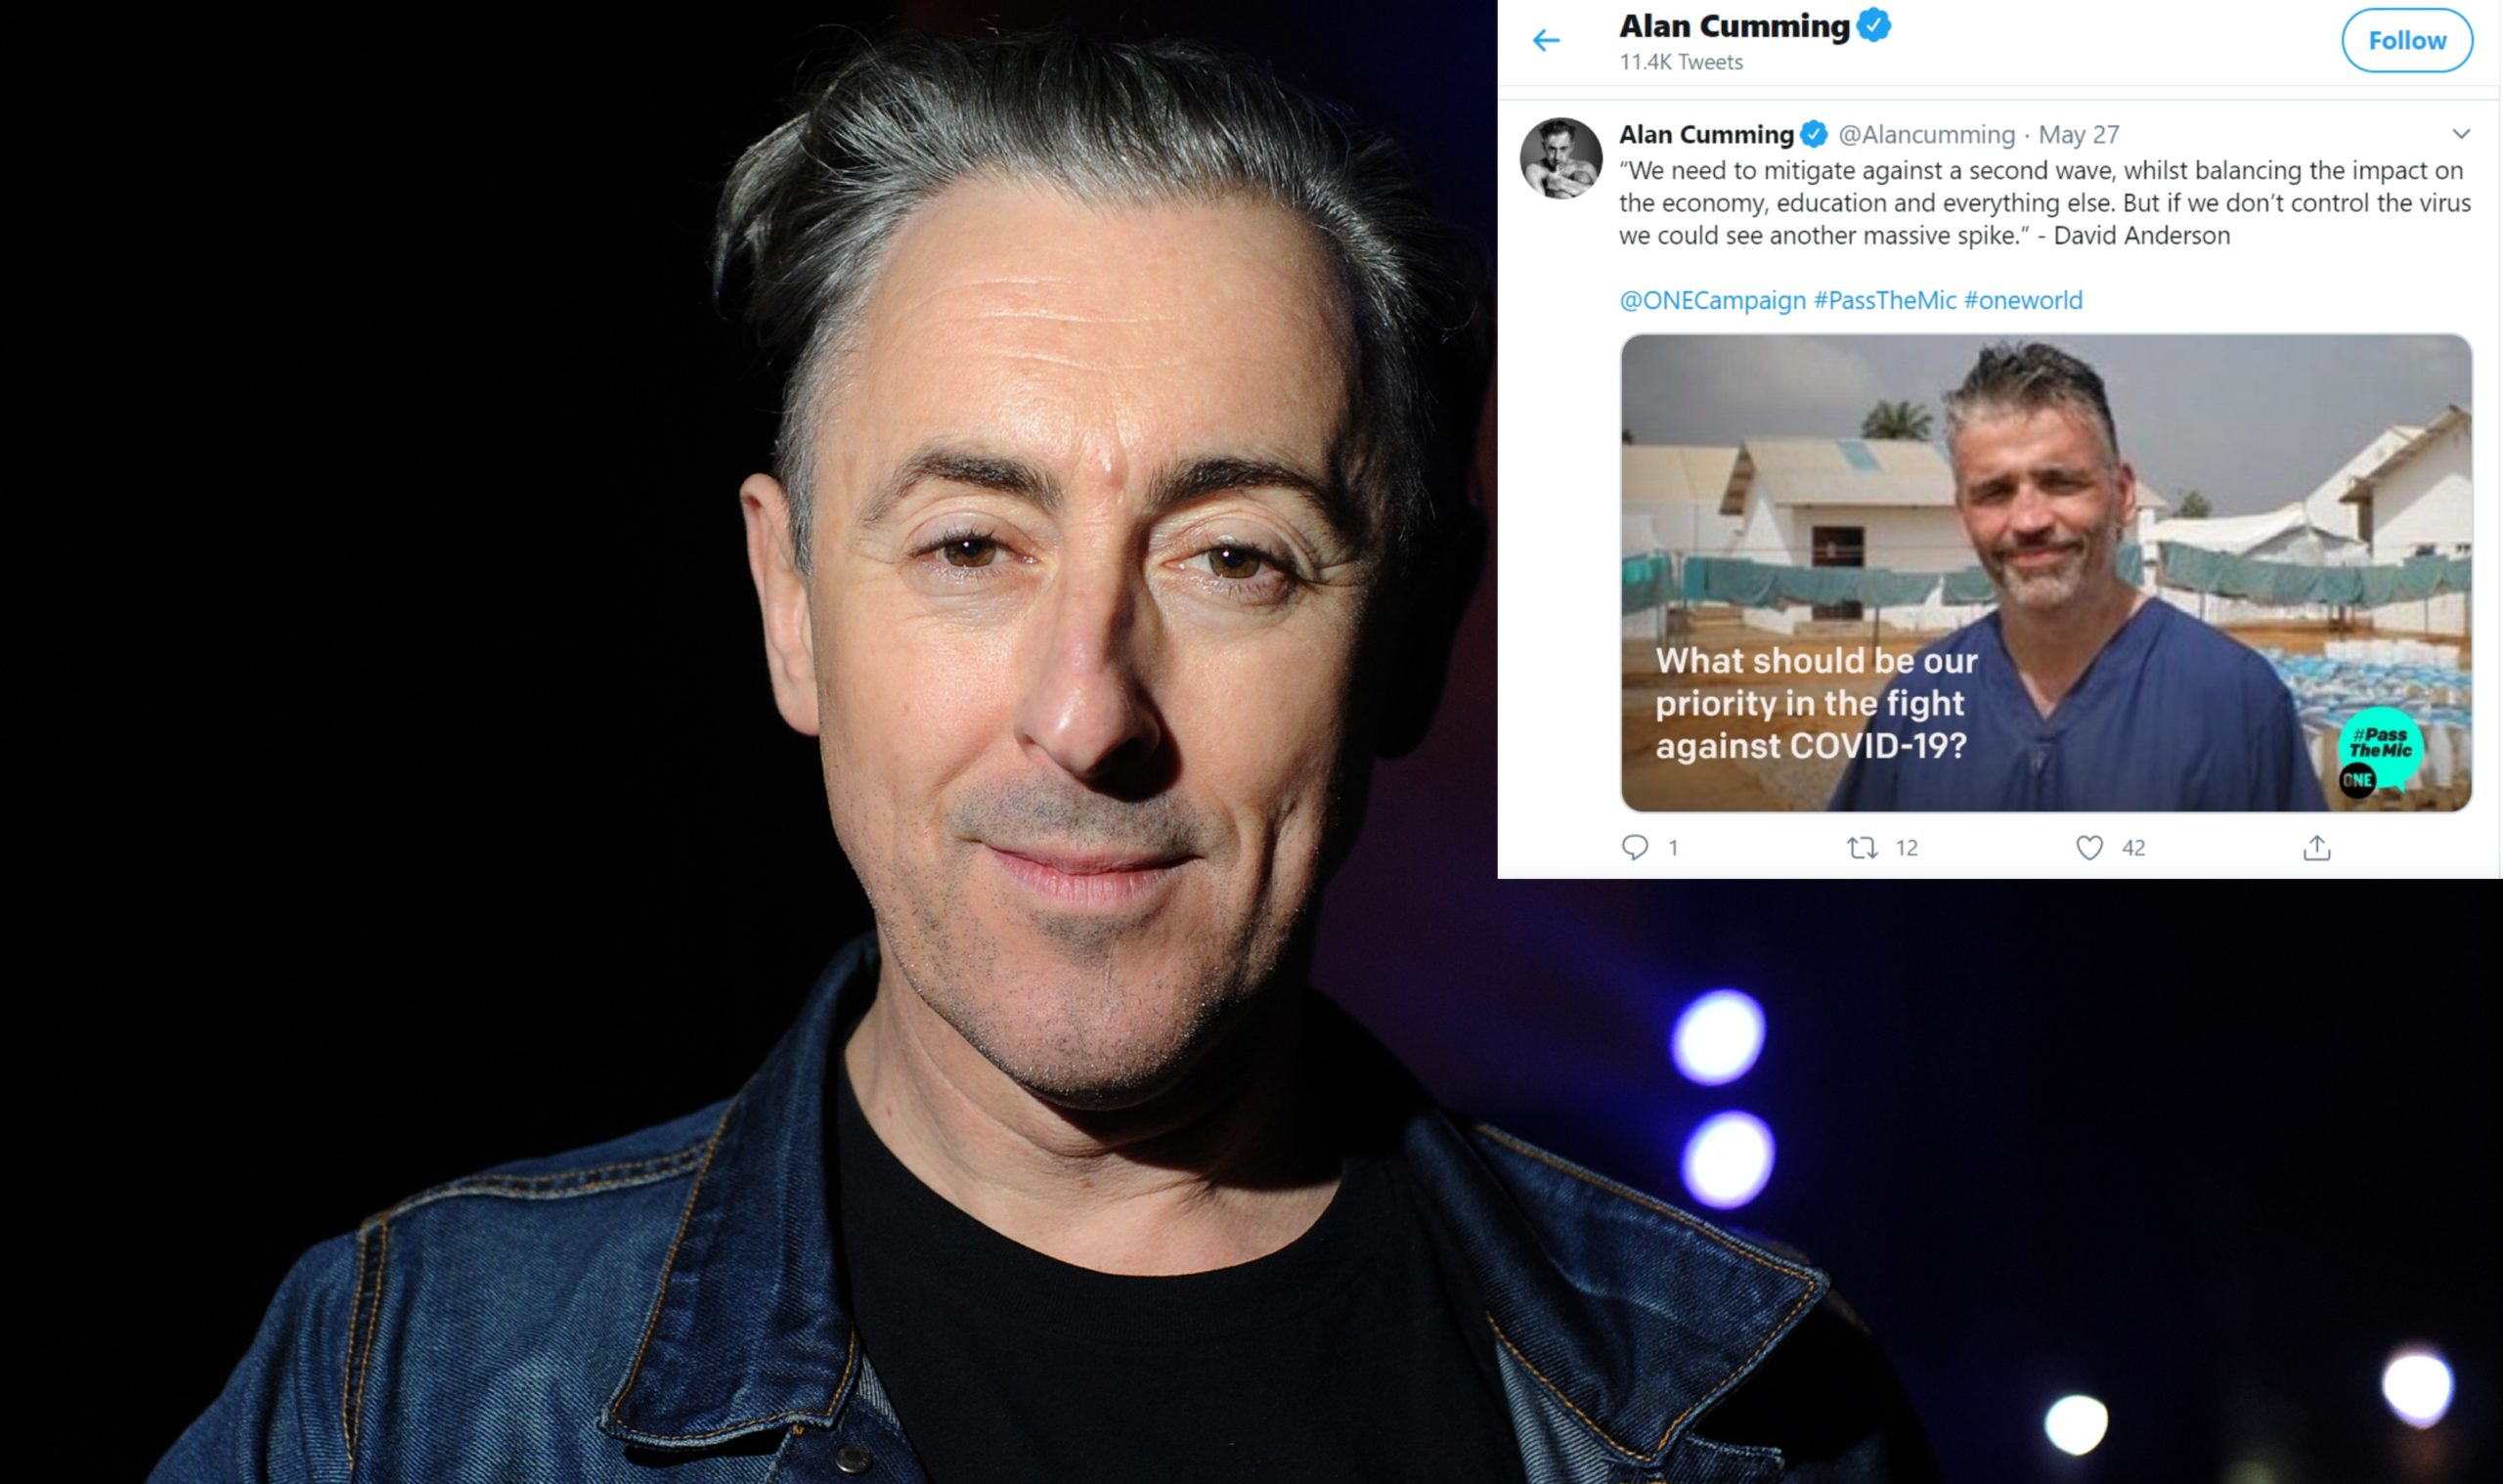 Actor Alan Cumming and, inset, David Anderson's Tweets from his Twitter account